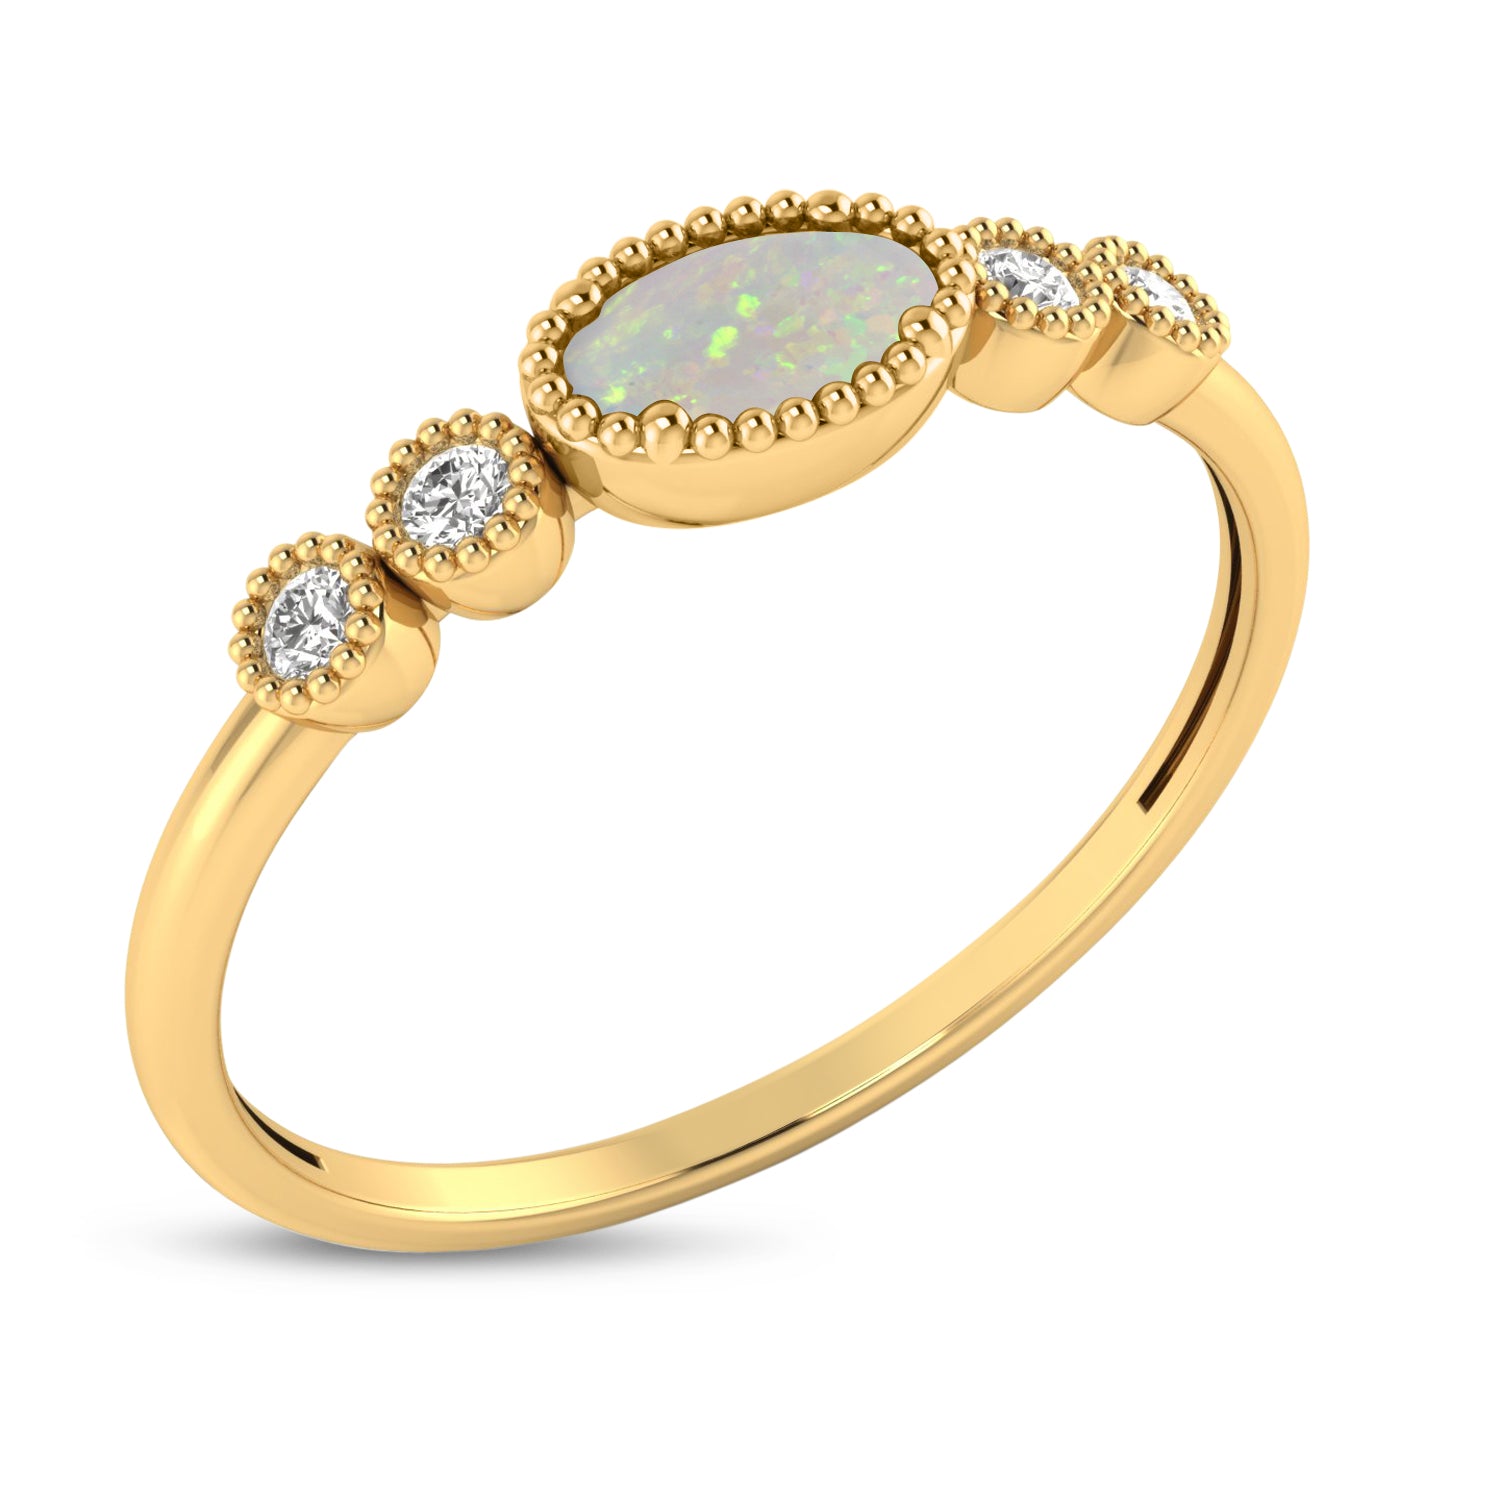 14K Yellow Gold Oval Opal and Diamond Stackable Ring RM4307X-OCT